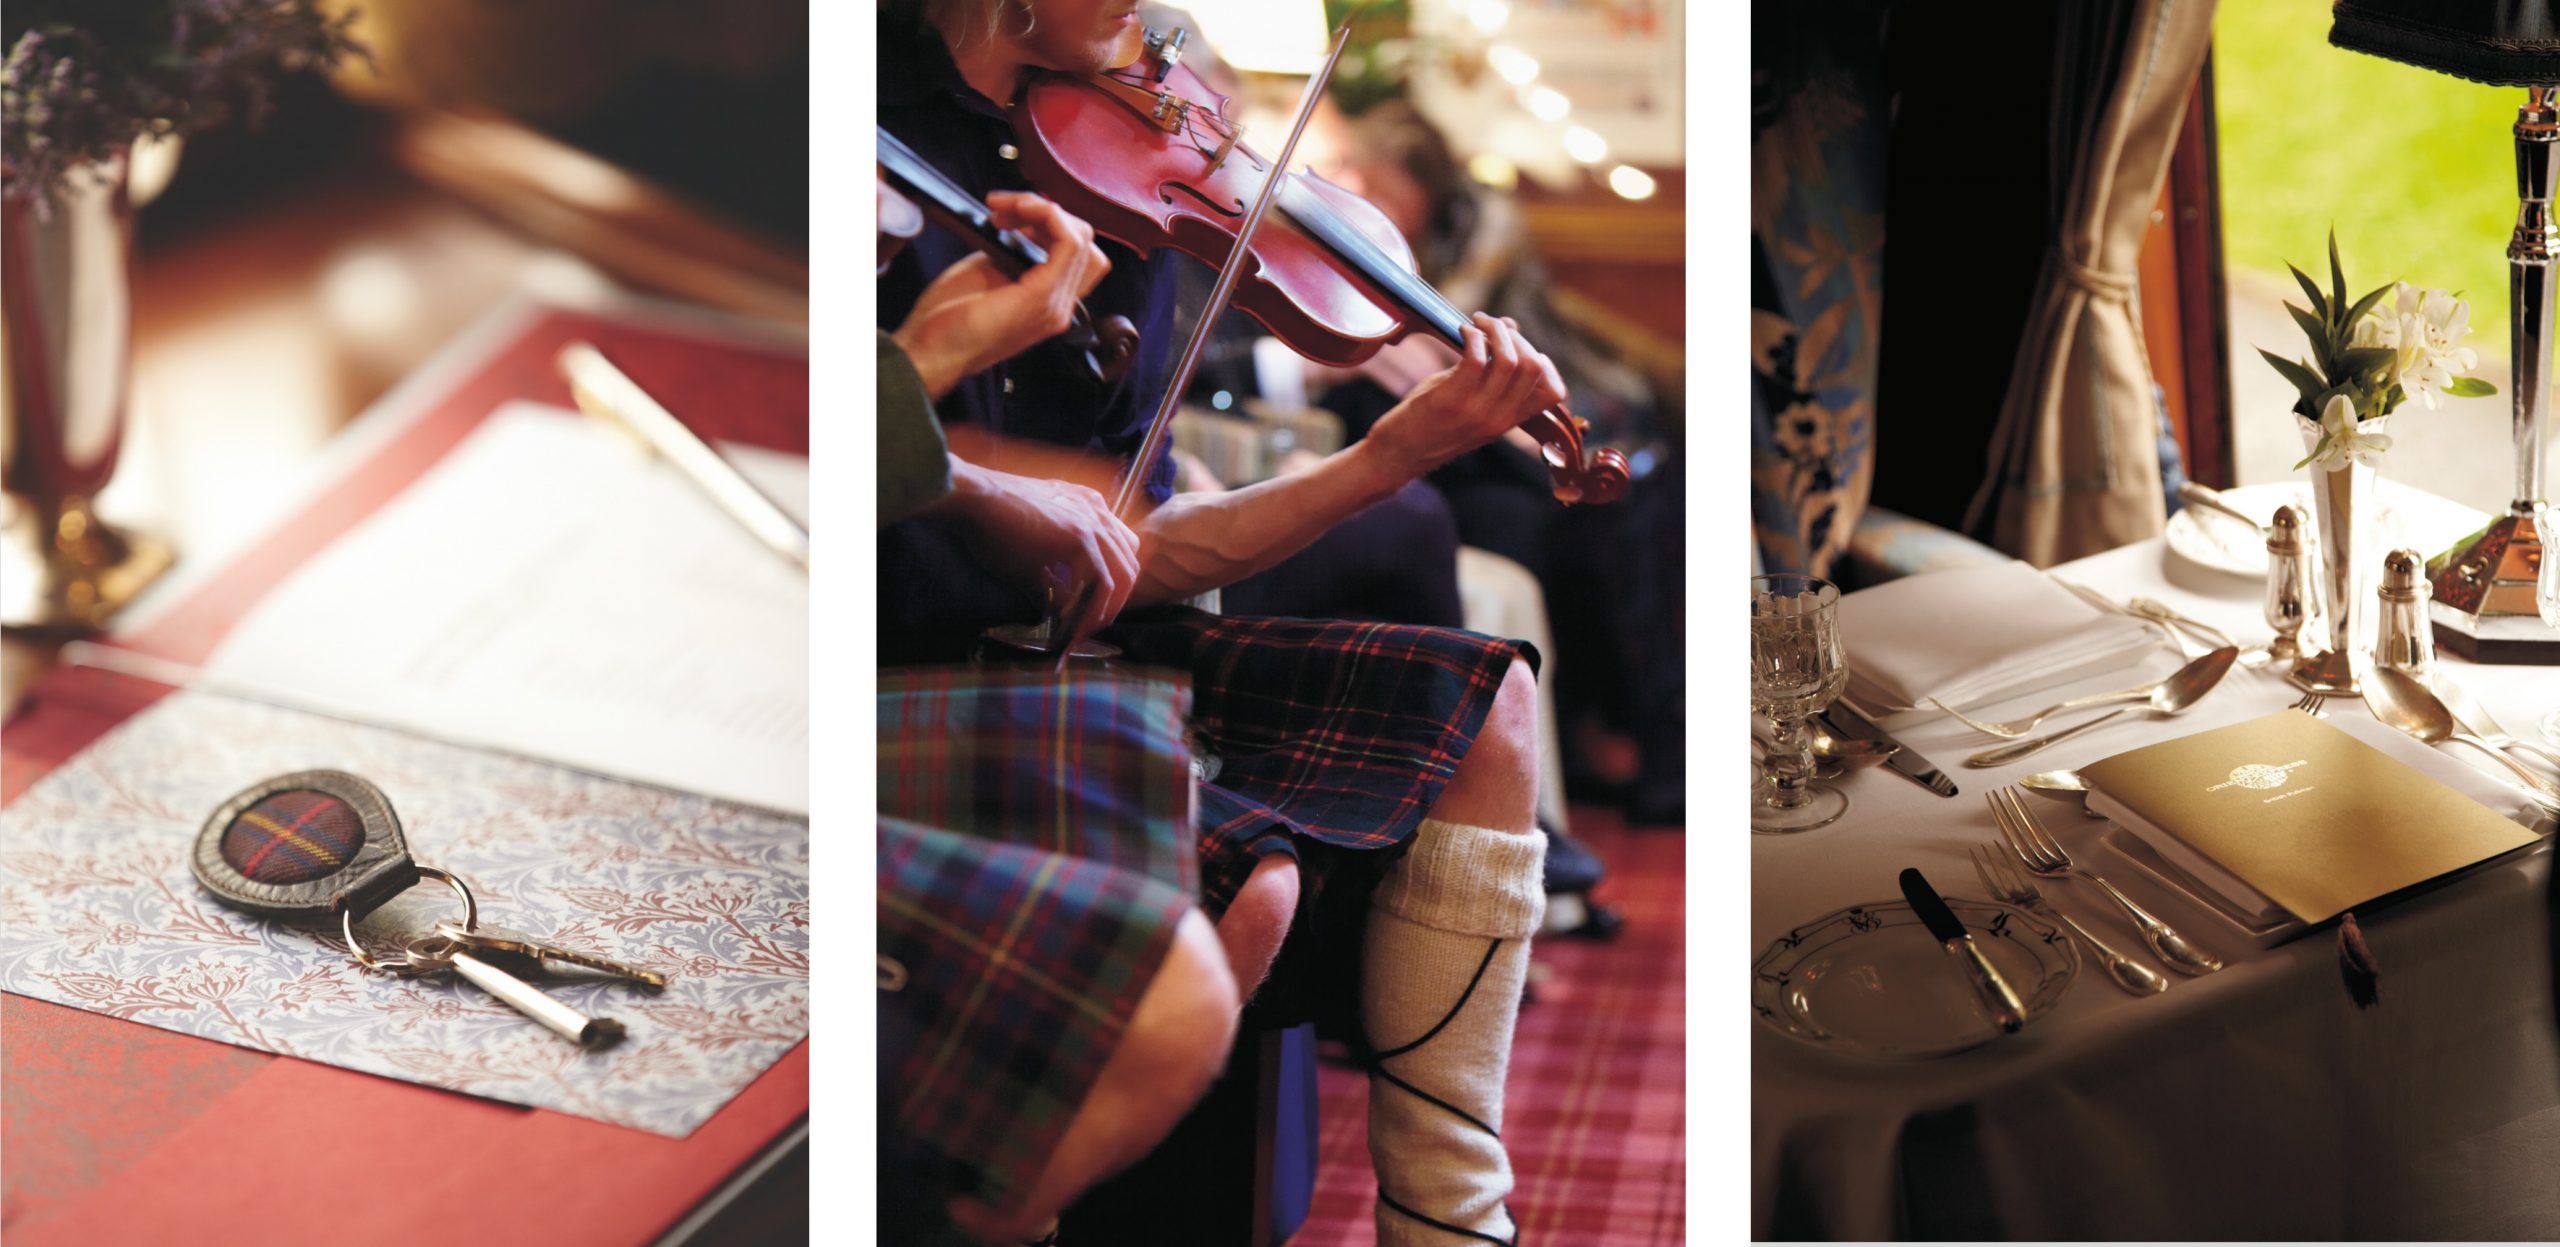 Orient-Express, keys on welcome pack, Scottish musicians, redesigned menu in the dinning car all onboard The Royal Scotsman train